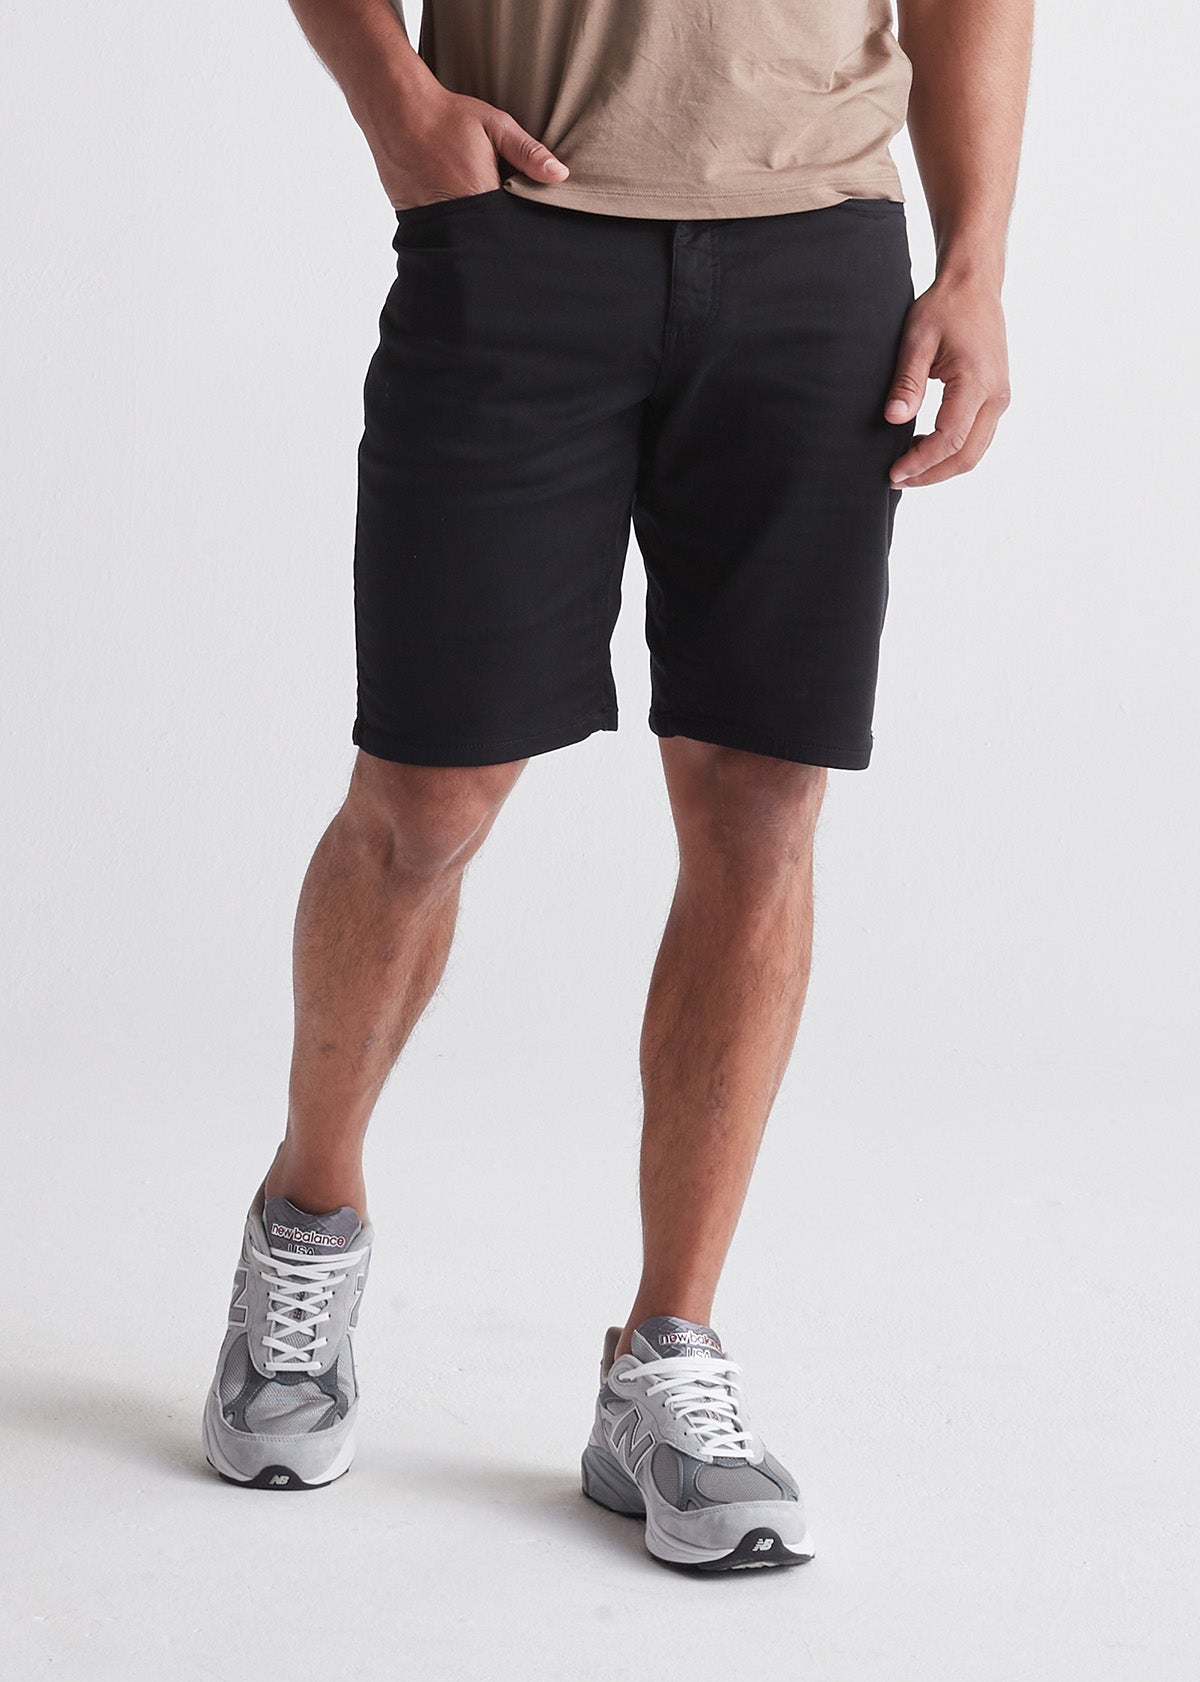 Camo Running Short Pants Men Quick Dry Sport Shorts - China Casual Pant and  Jogging Sport Pants price | Made-in-China.com